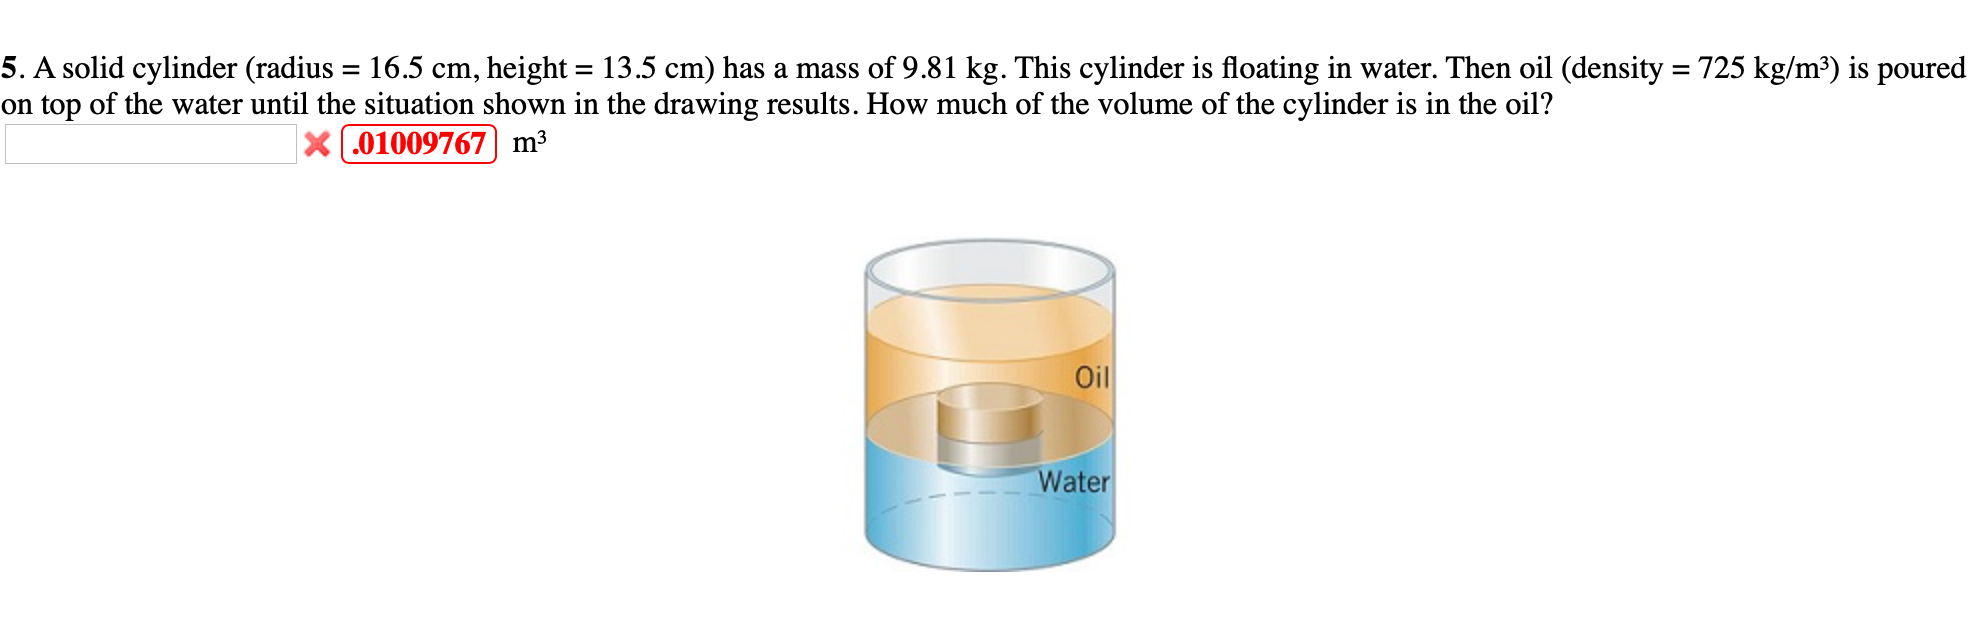 5. A solid cylinder (radius = 16.5 cm, height = 13.5 cm) has a mass of 9.81 kg. This cylinder is floating in water. Then oil (density = 725 kg/m³) is poured
on top of the water until the situation shown in the drawing results. How much of the volume of the cylinder is in the oil?
%3D
X.01009767 m3
Oil
Water
